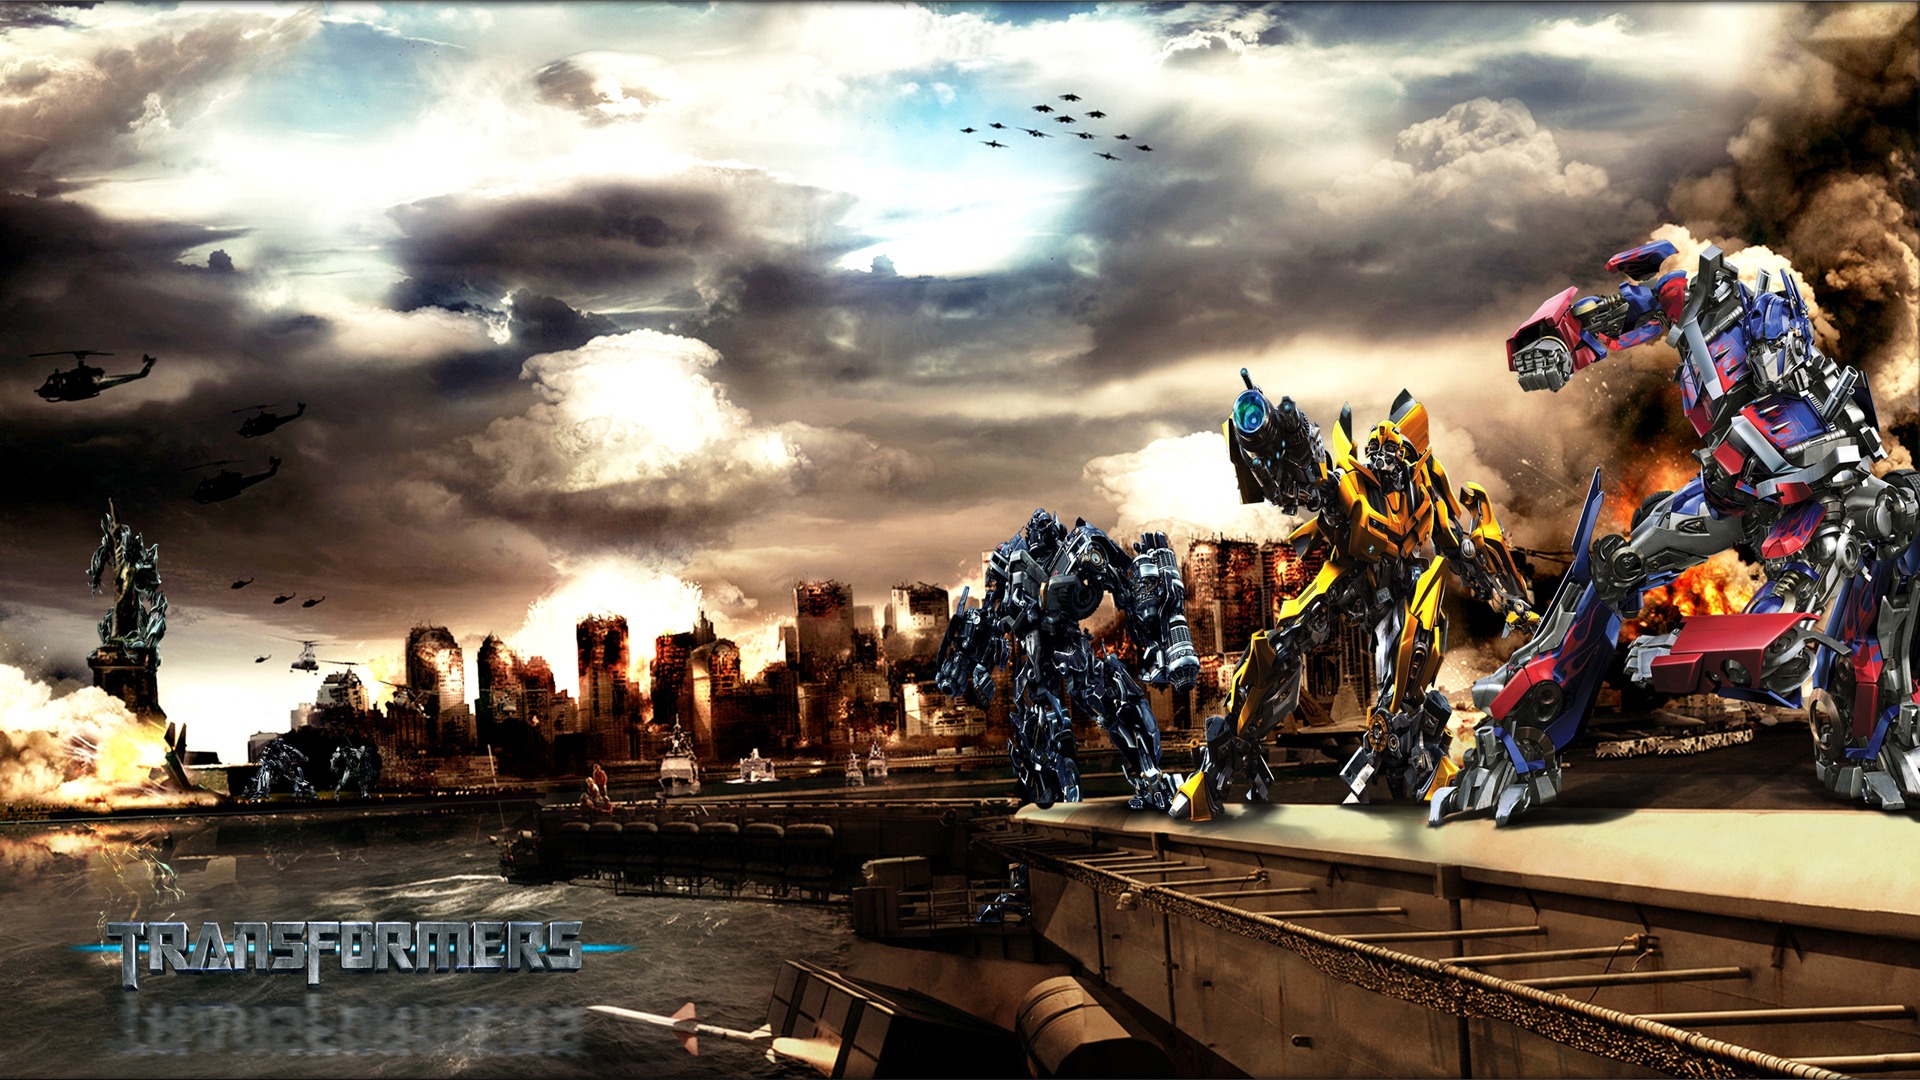 Transformers Background   Wallpaper High Definition High Quality